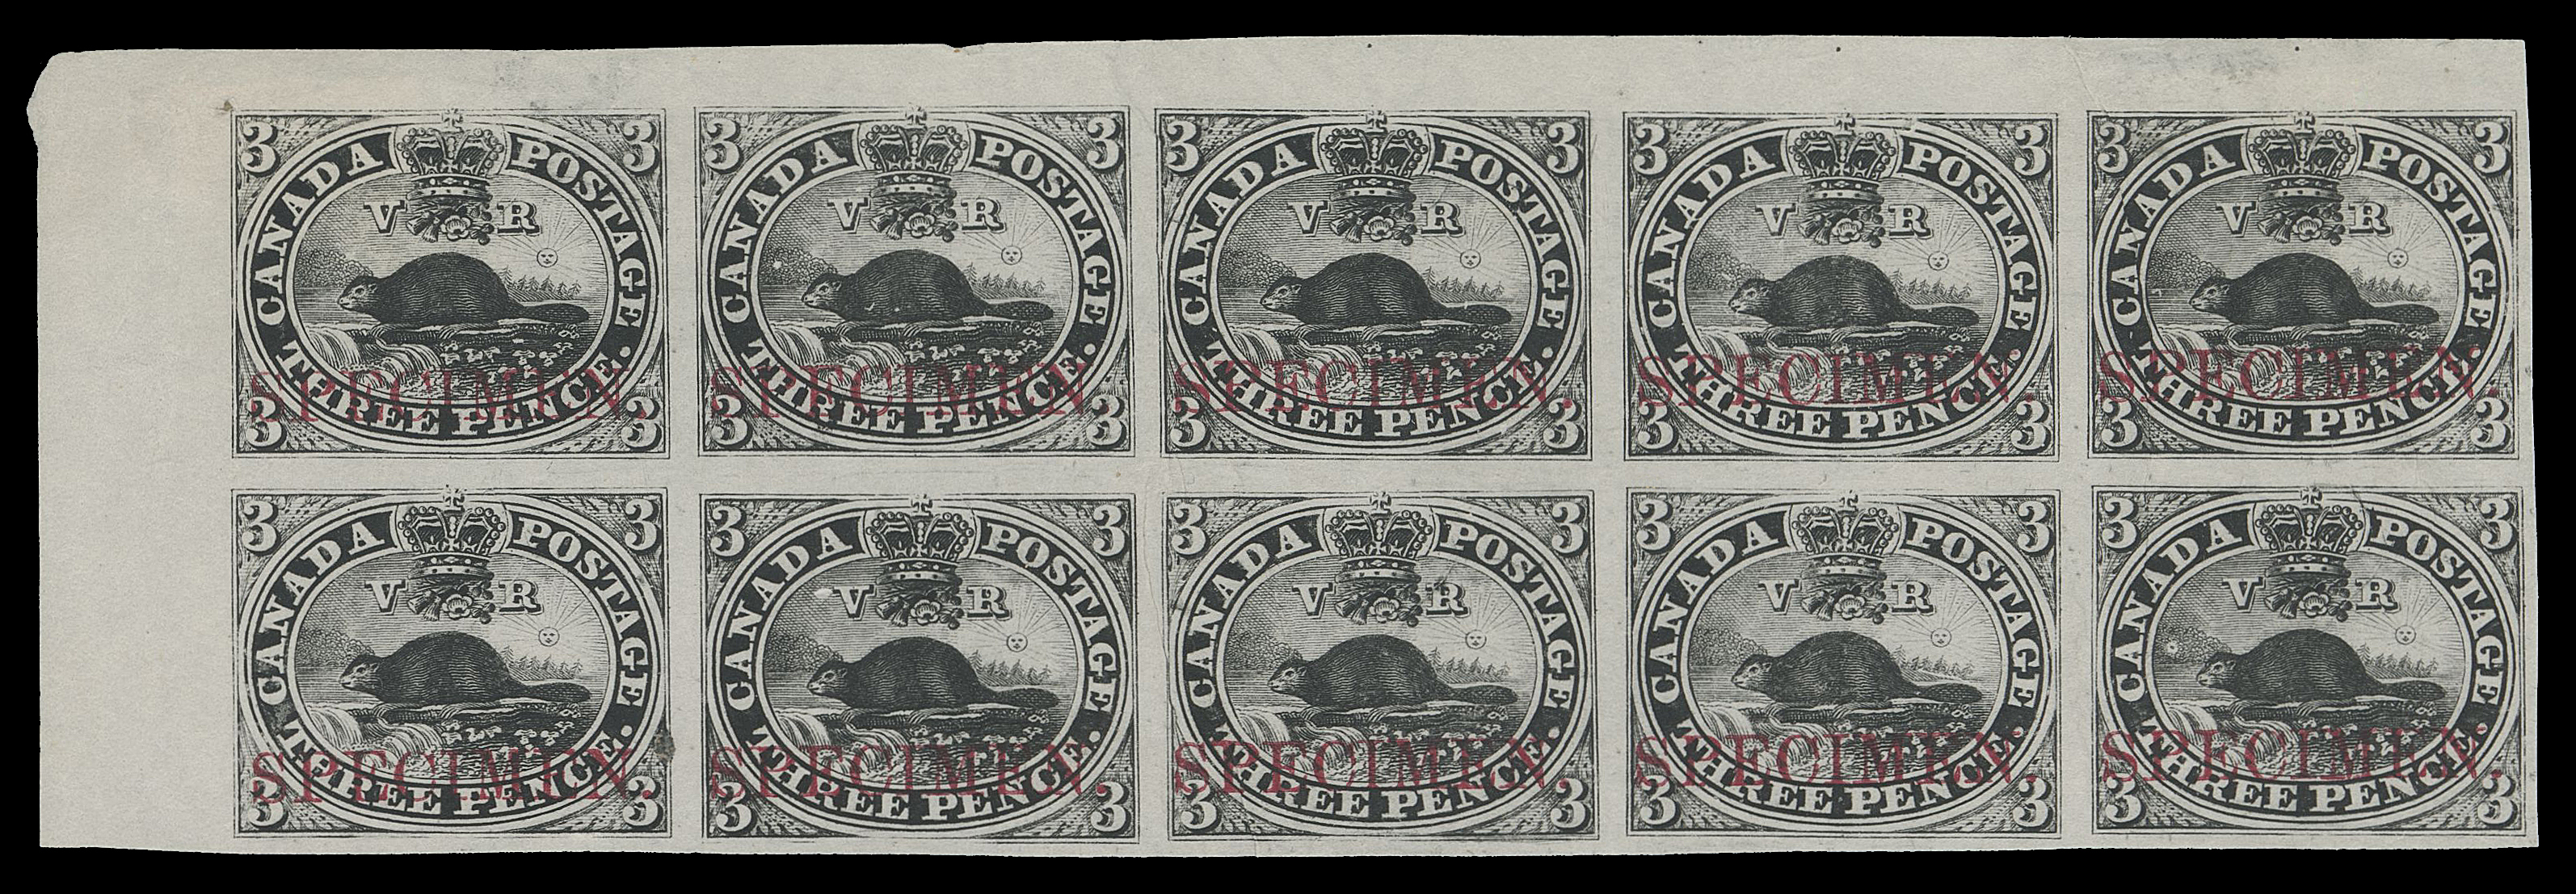 THREE PENCE AND FIVE CENTS  1TCiii,An impressive corner margin trial colour plate proof block of ten (Pane B, Positions 1-5 / 11-15) printed in black on india, horizontal SPECIMEN in carmine, natural wrinkling on four, otherwise VF, a rarely seen trial colour proof.

Provenance: Dale-Lichtenstein, Sale 2 - British North America Part One, November 1968; Lot 4 (as a block of 25 from which this originates)

This block came from an early printing and is without plate imprints (insertion of the imprints only occurred following the Printing Order of October 1856). 